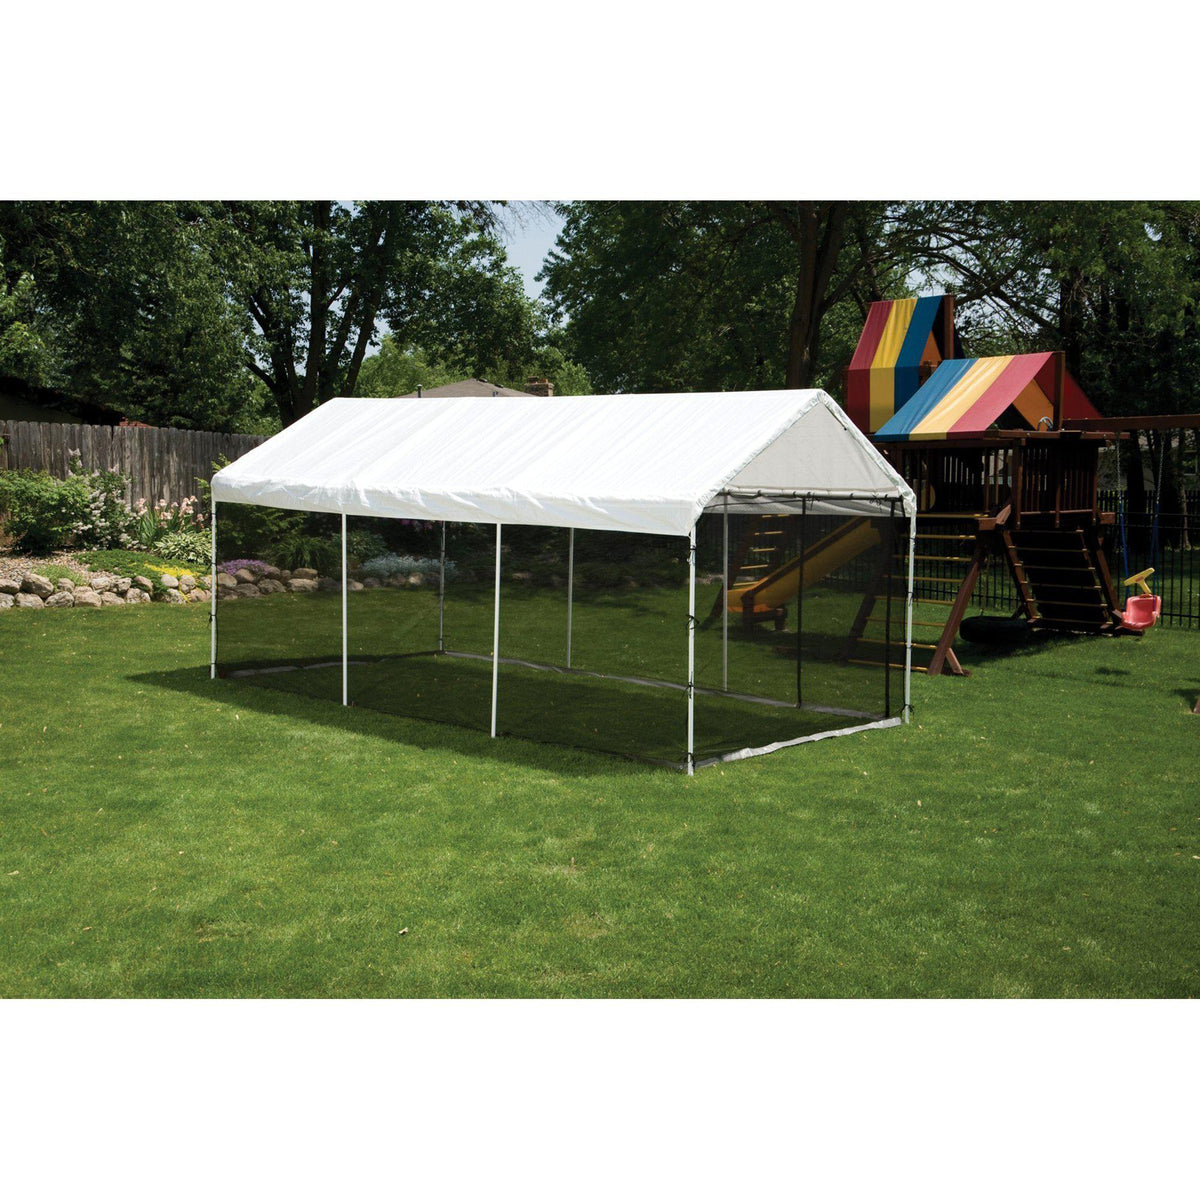 ShelterLogic MaxAP 2-in-1 Canopy with Screen Kit, White, 10 x 20 ft.